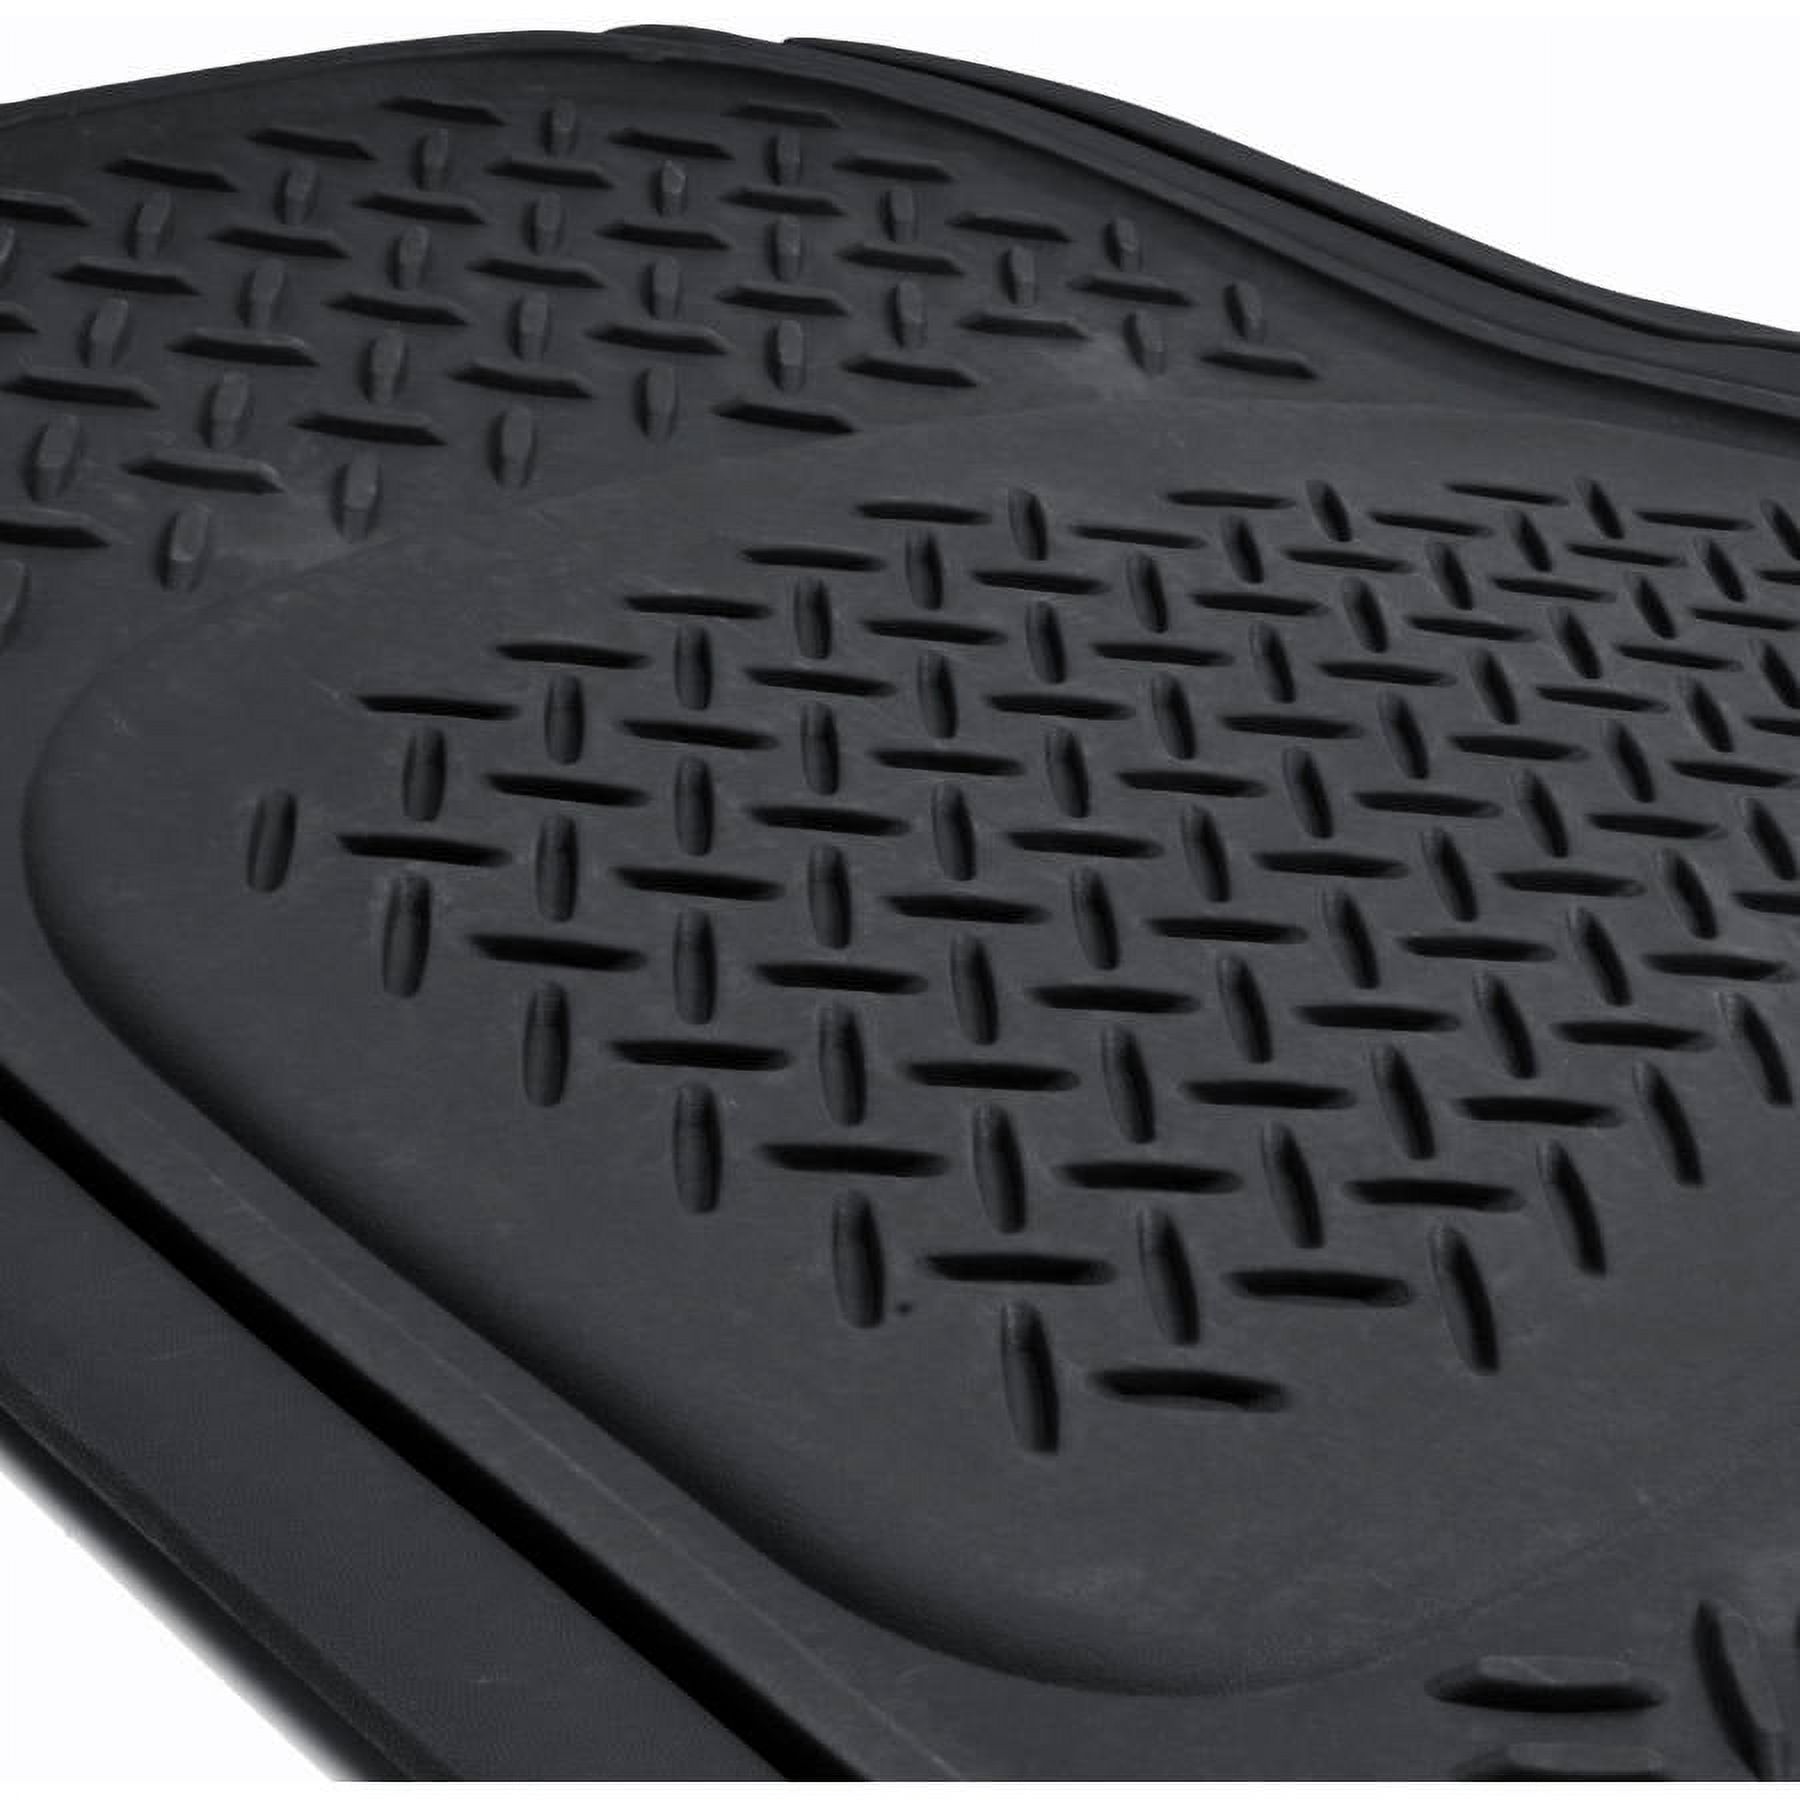 BDK MT-713-BK Diamond All-Weather Rubber Floor Mats for Car, SUV and Truck,  Trimmable, Heavy Duty